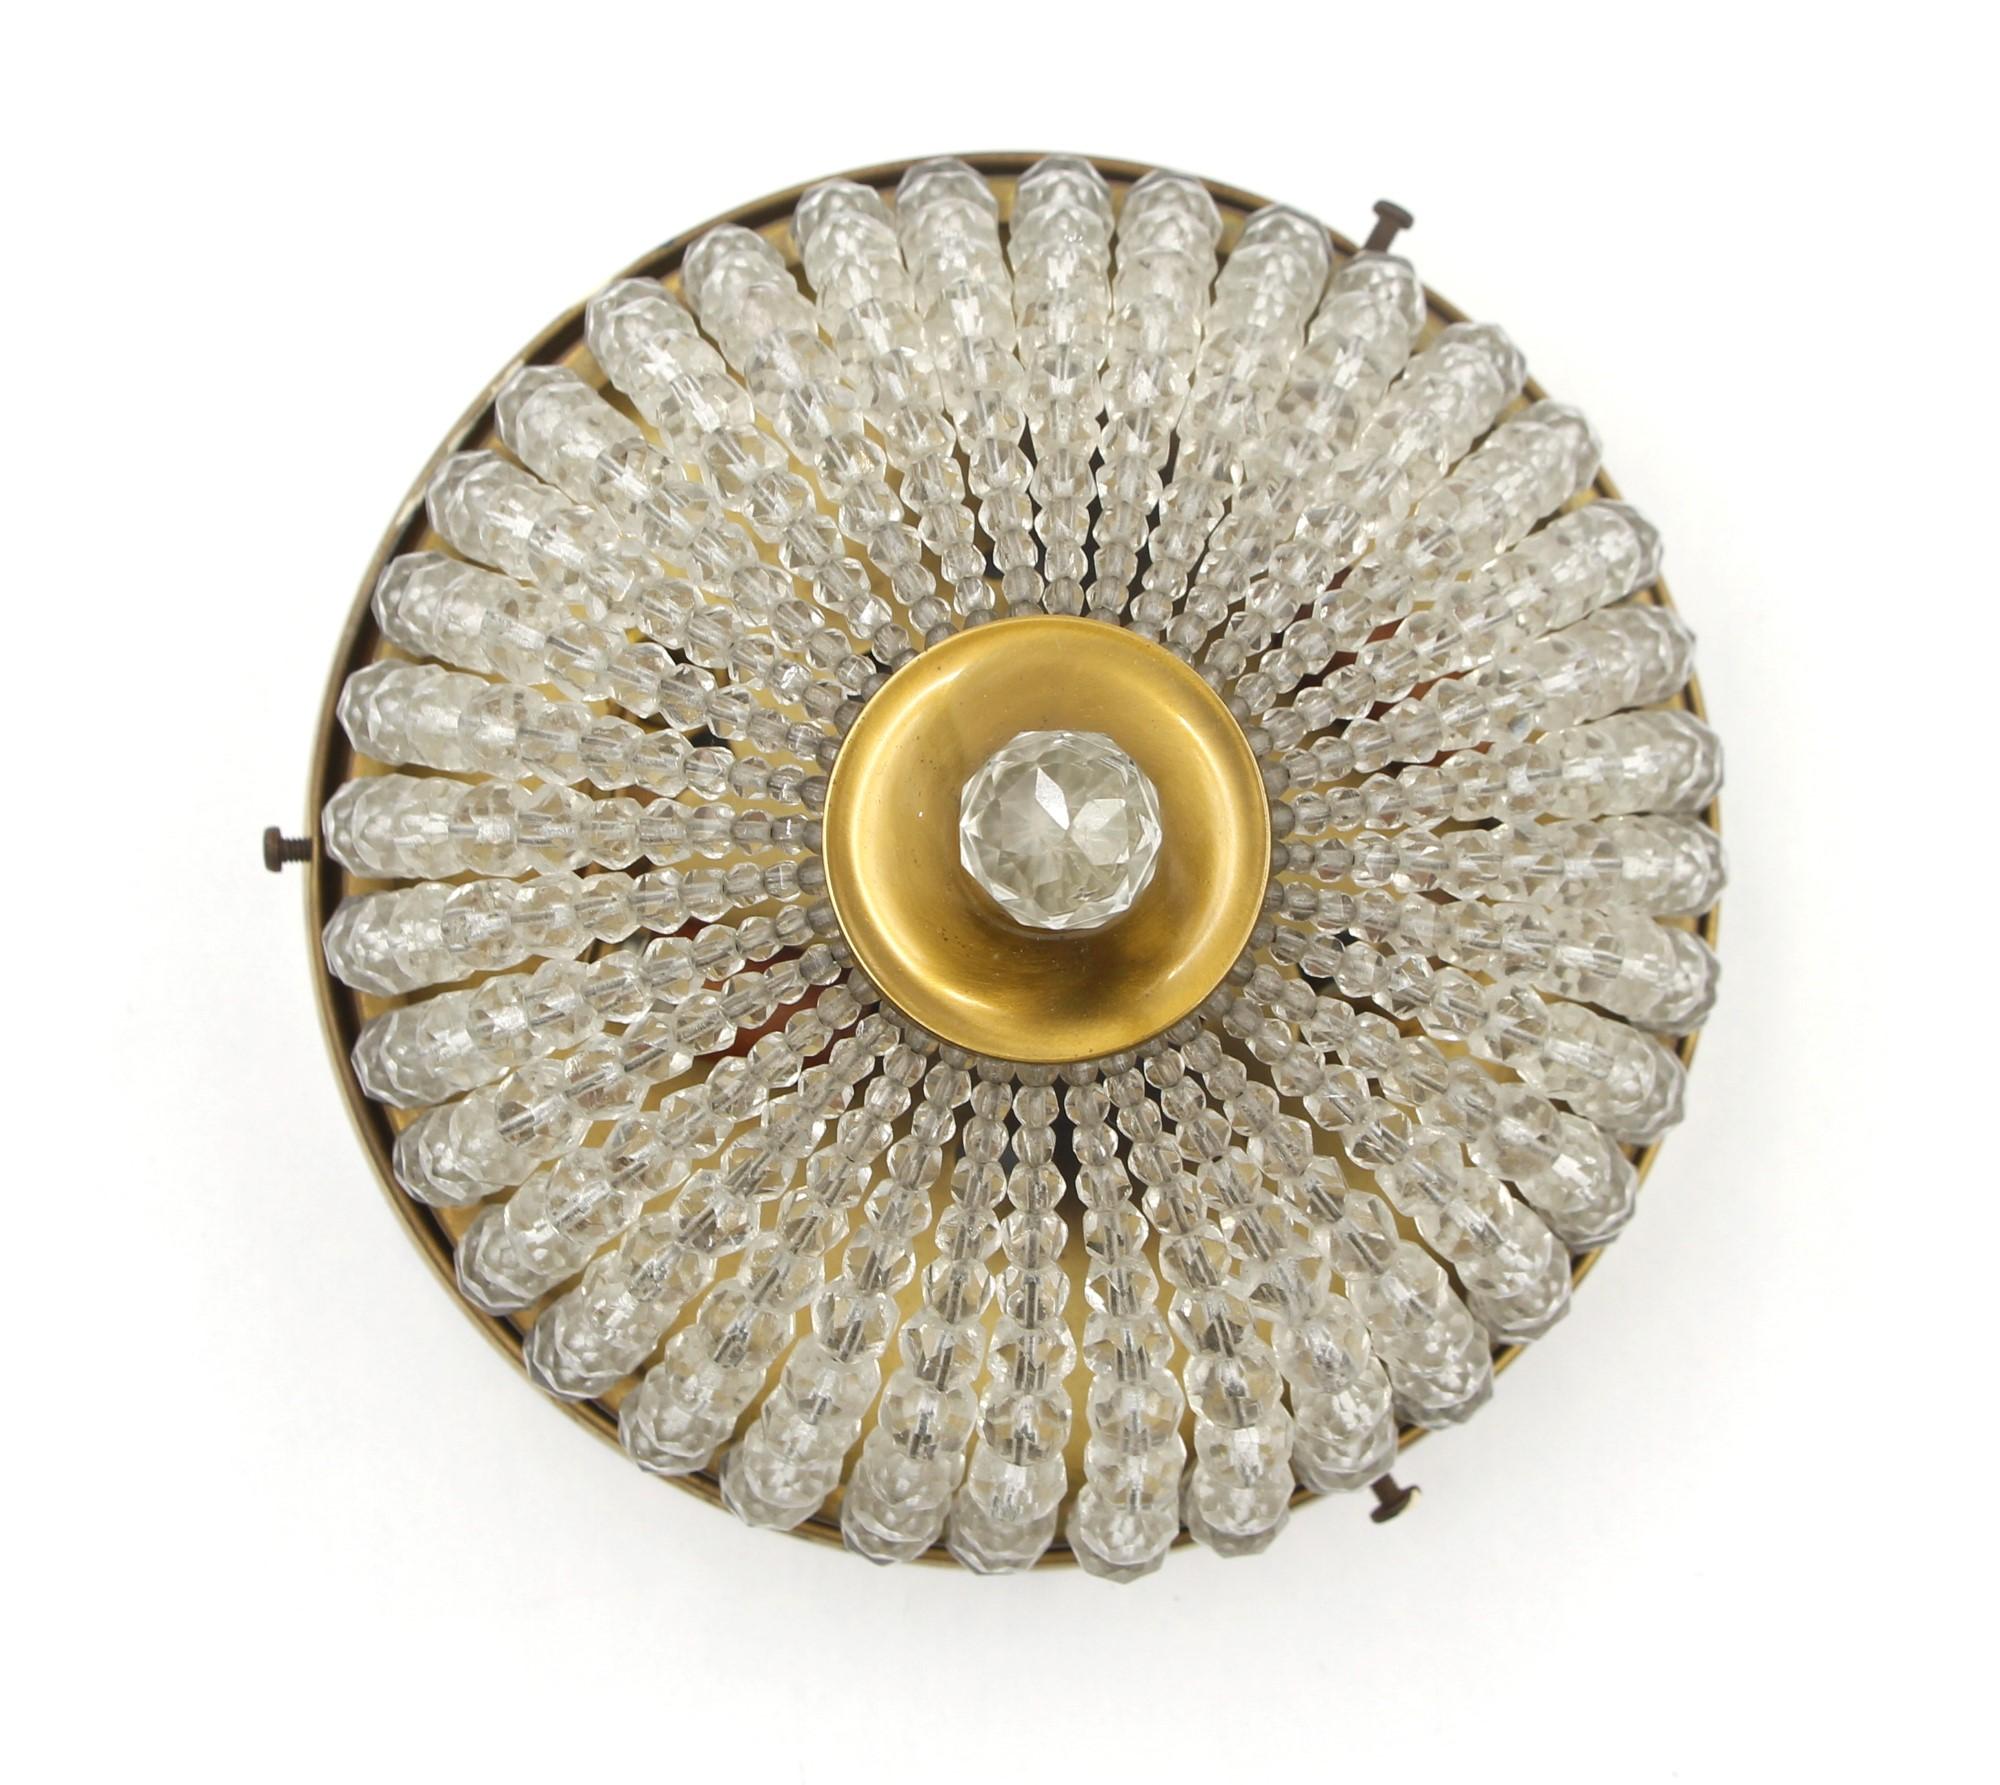 This 1920's beaded crystal flush mount light is an original to the suites of the Waldorf Astoria Towers in New York City. The beads are connected to the polished brass frame and have a faceted crystal finial at the bottom. The price includes